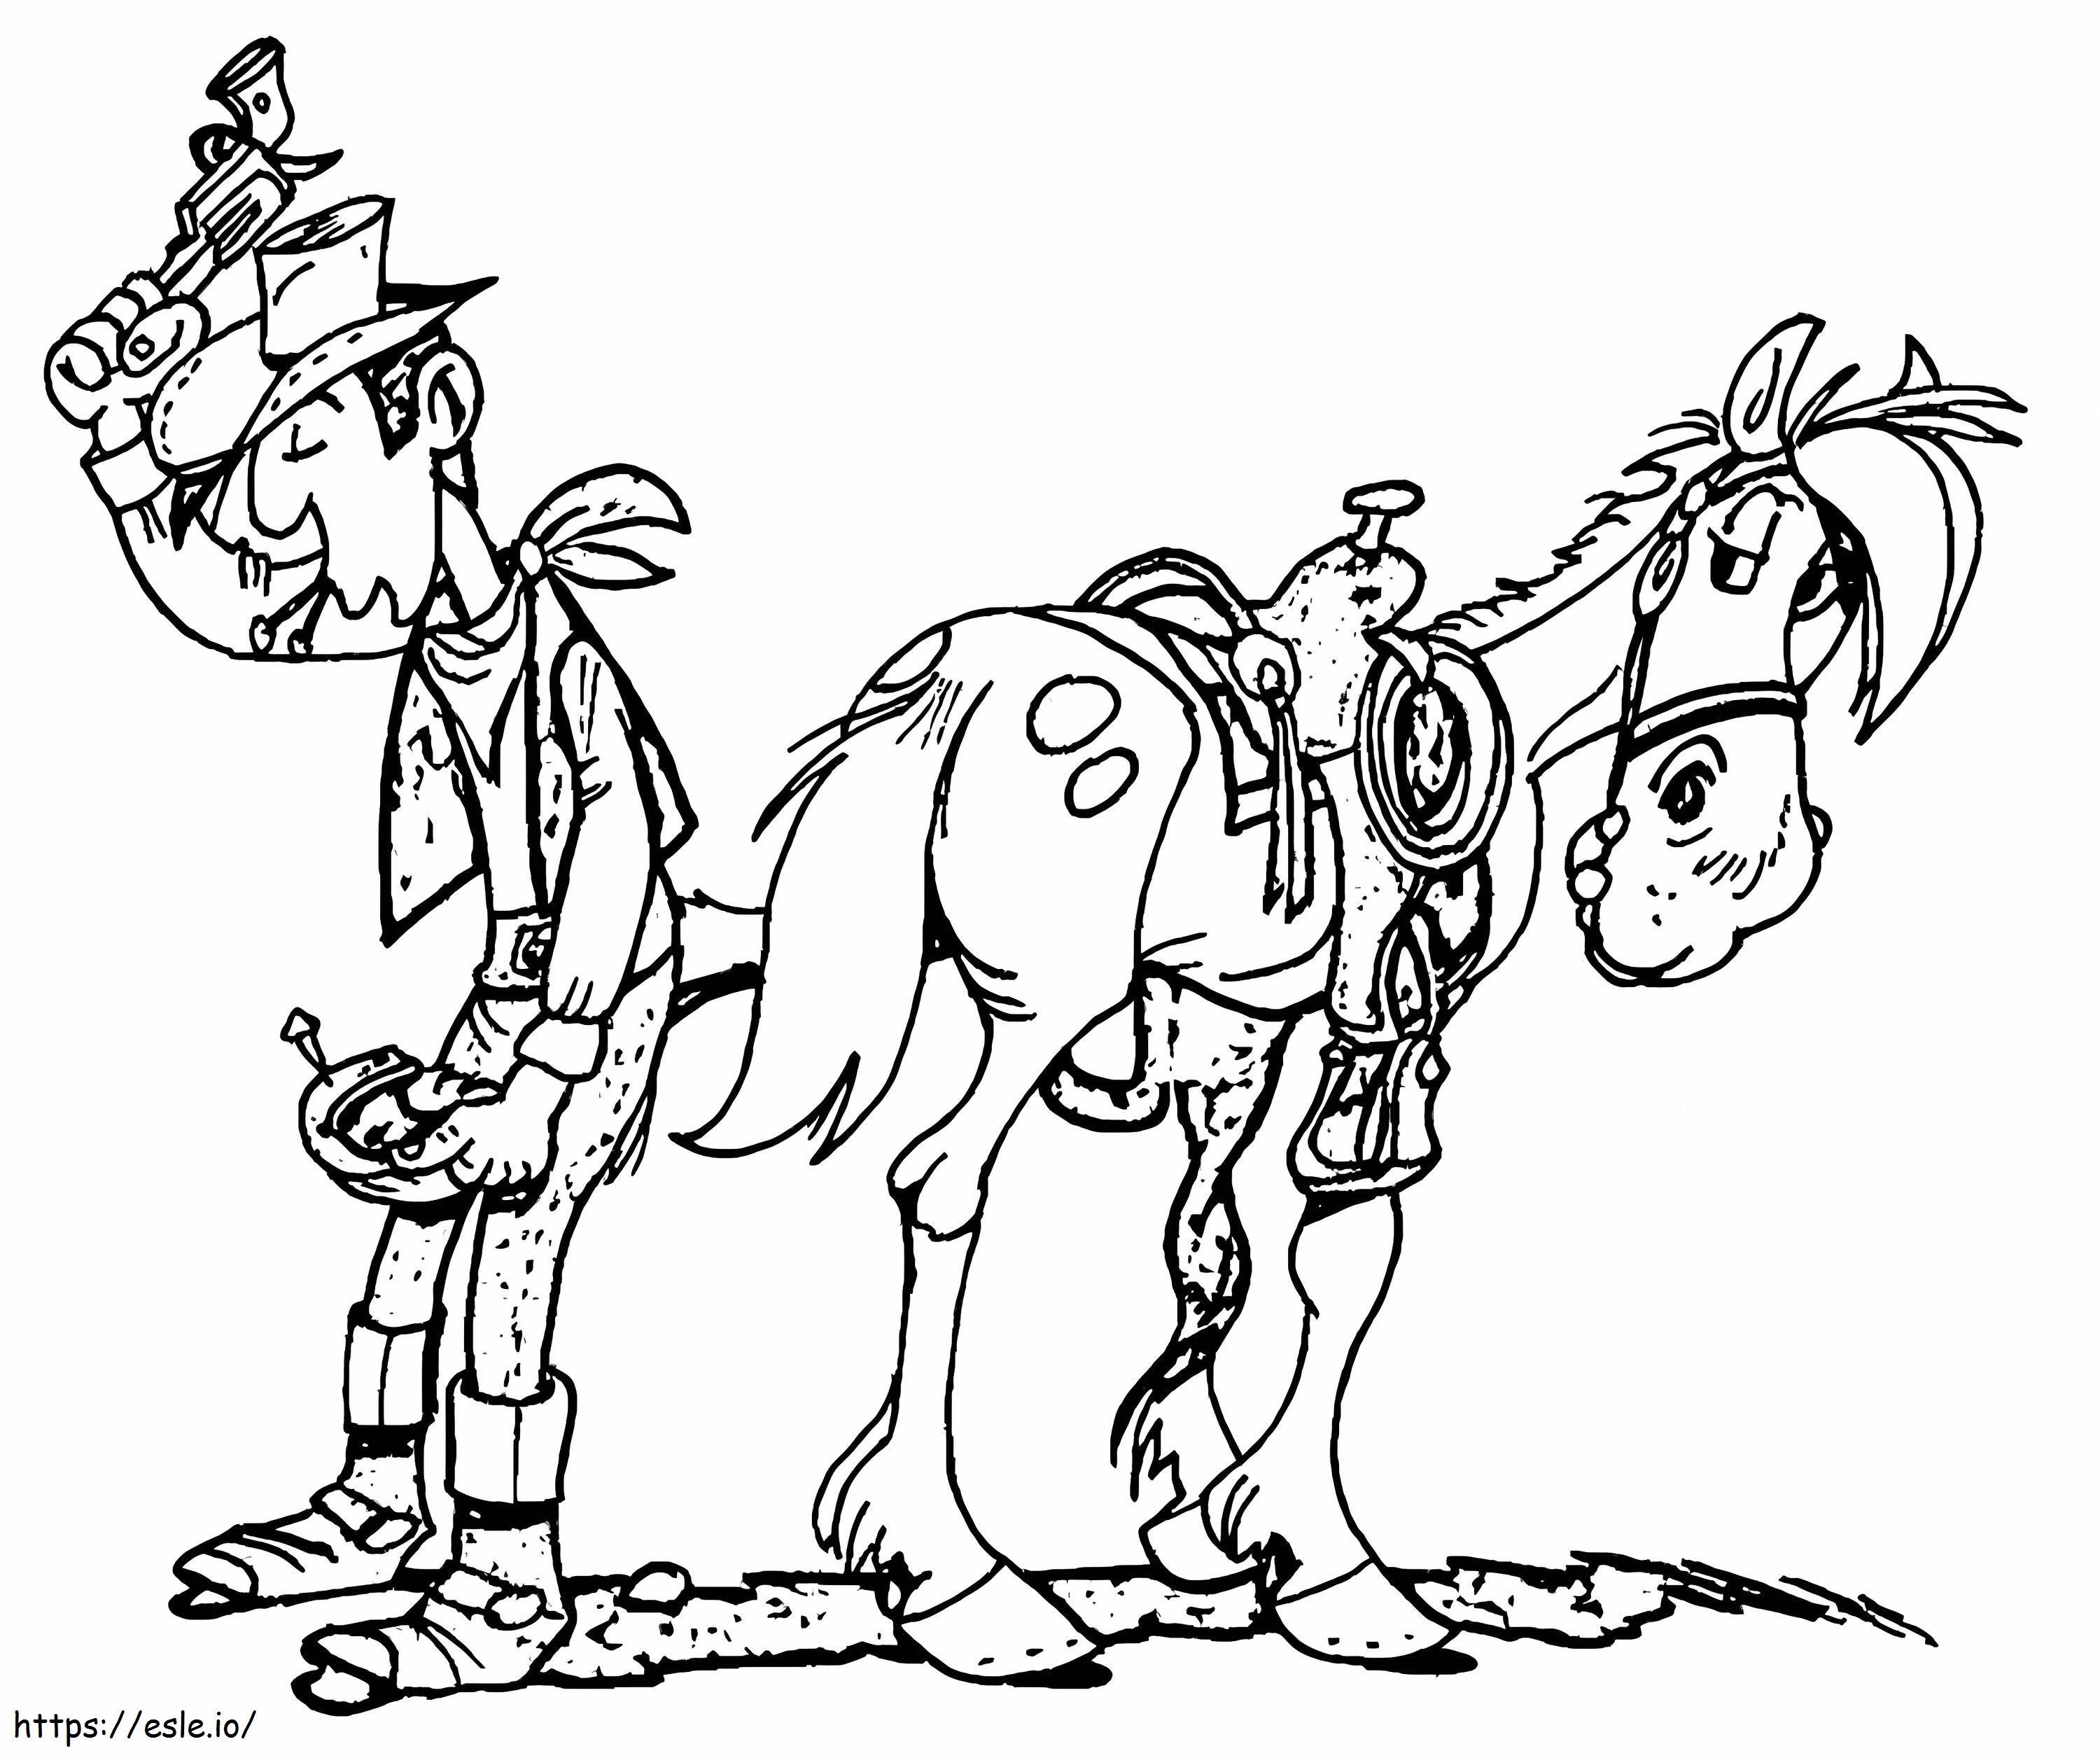 Jolly Jumper And Lucky Luke coloring page